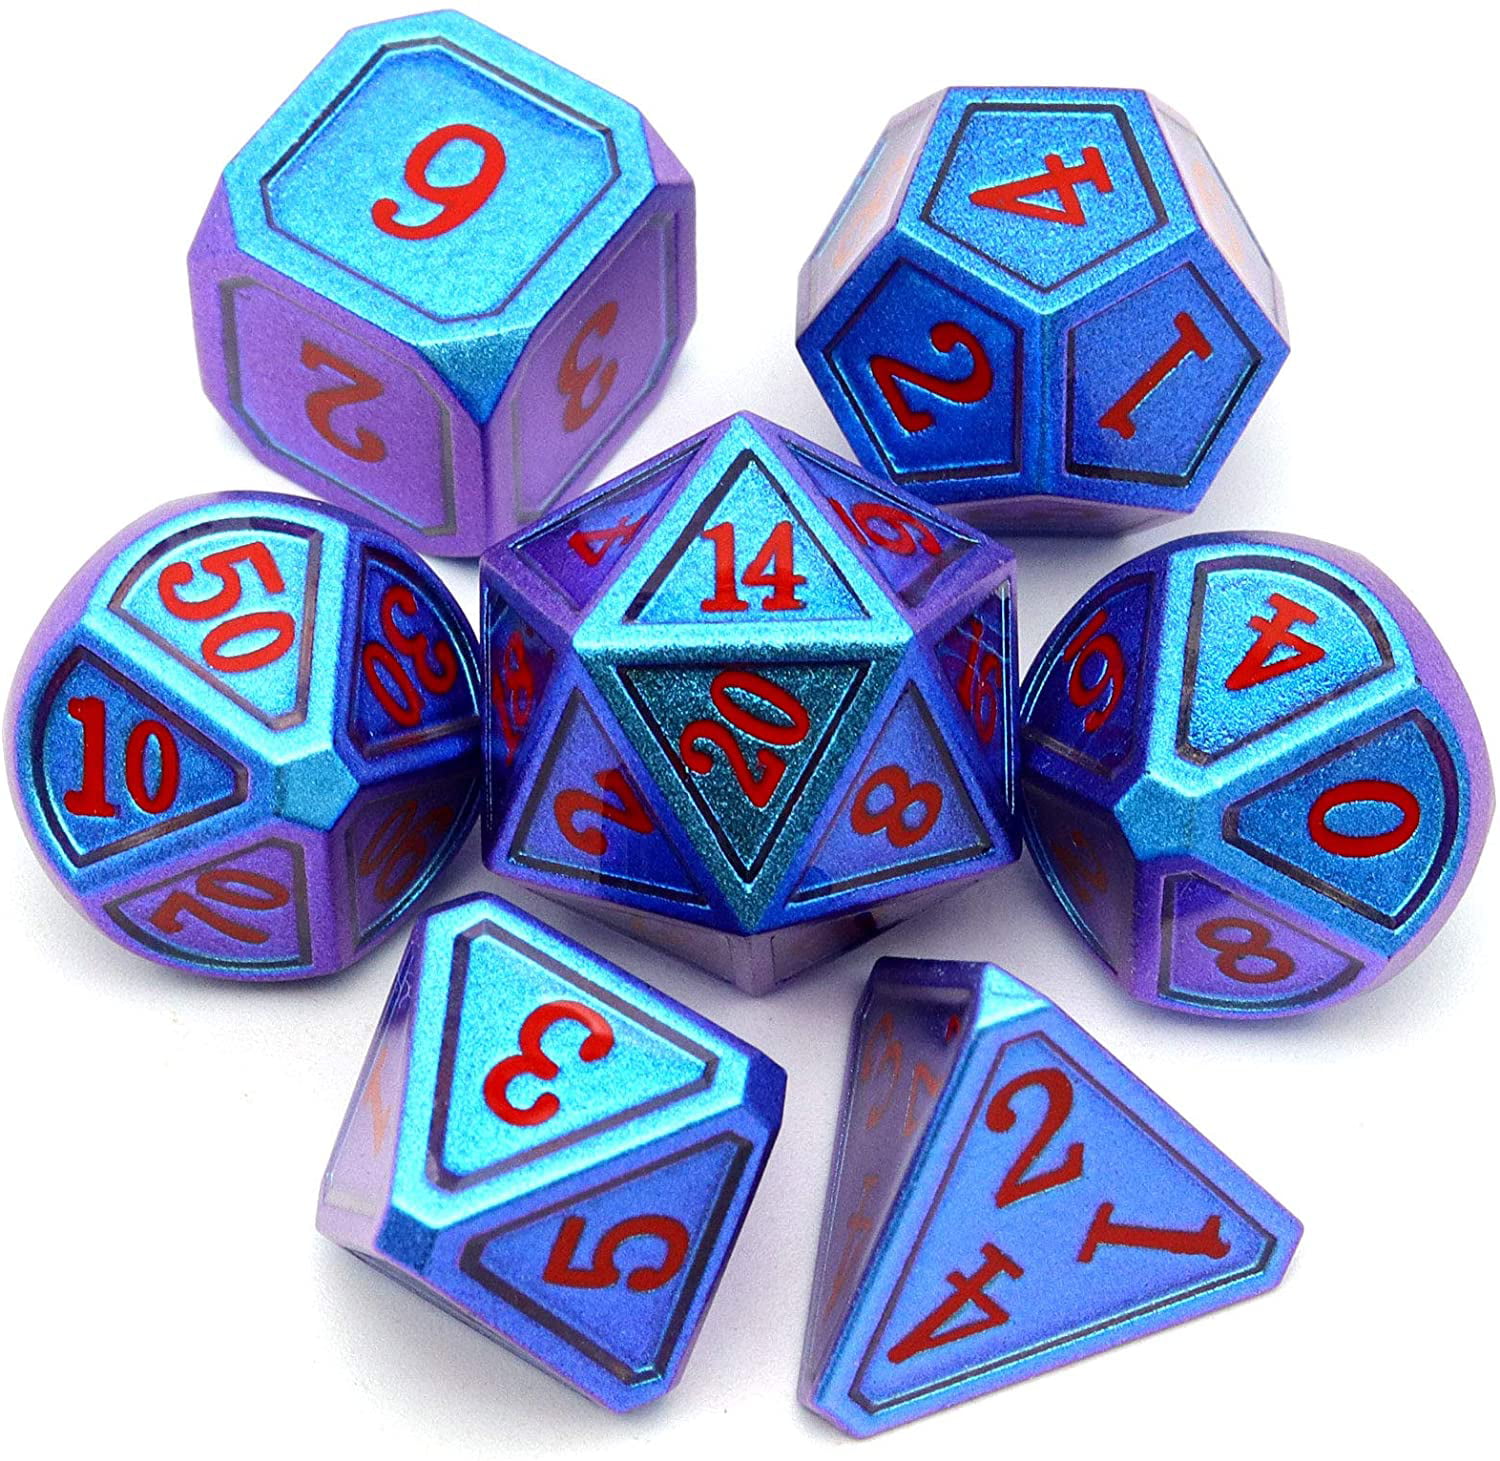 Details about   Haxtec Copper Blue White Metal DND Dice Set D&D Dice for Dungeons and Dragons RP 